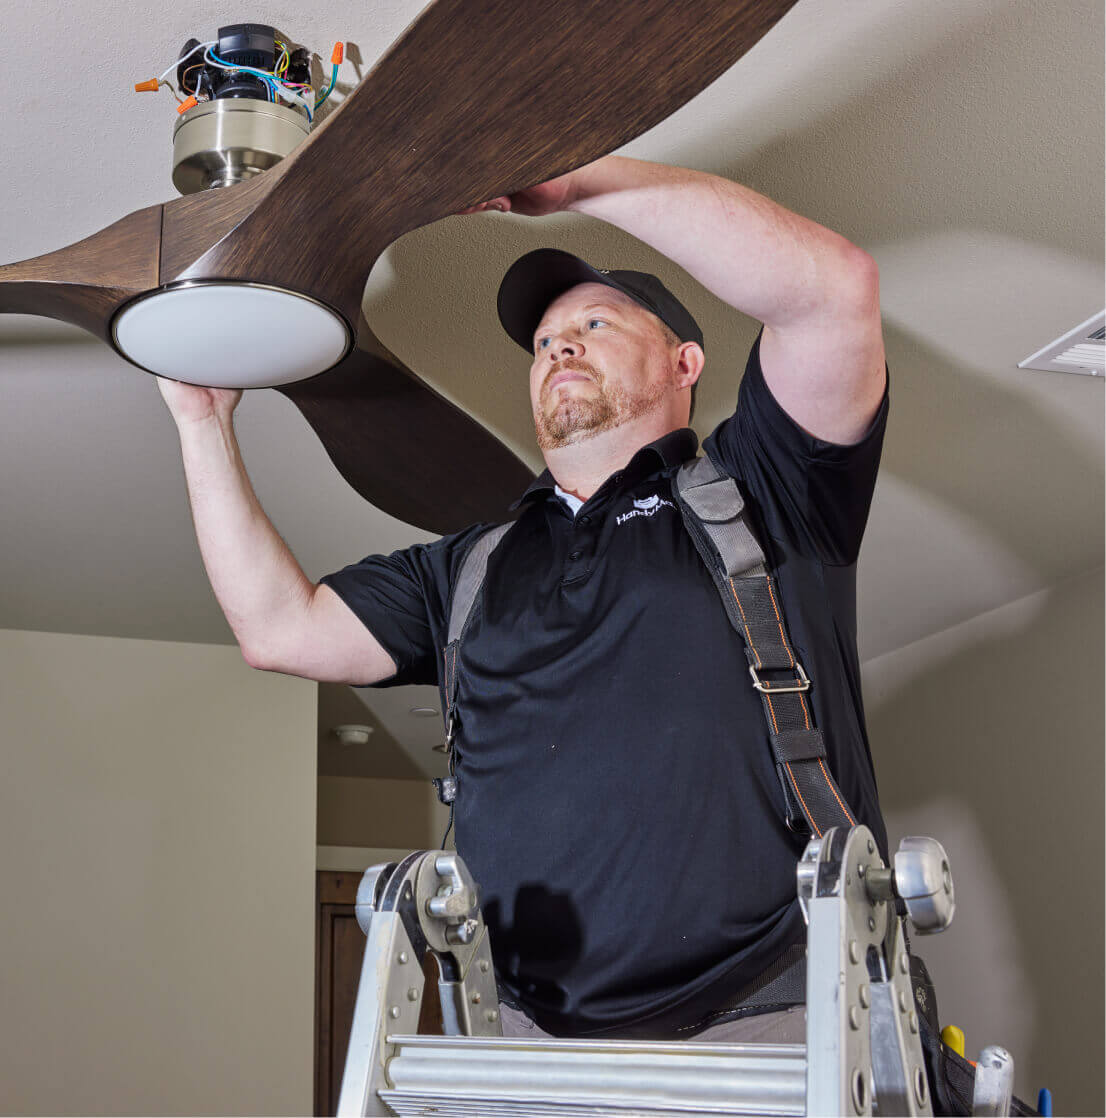 Handyman insurance in West Virginia tailored for your business